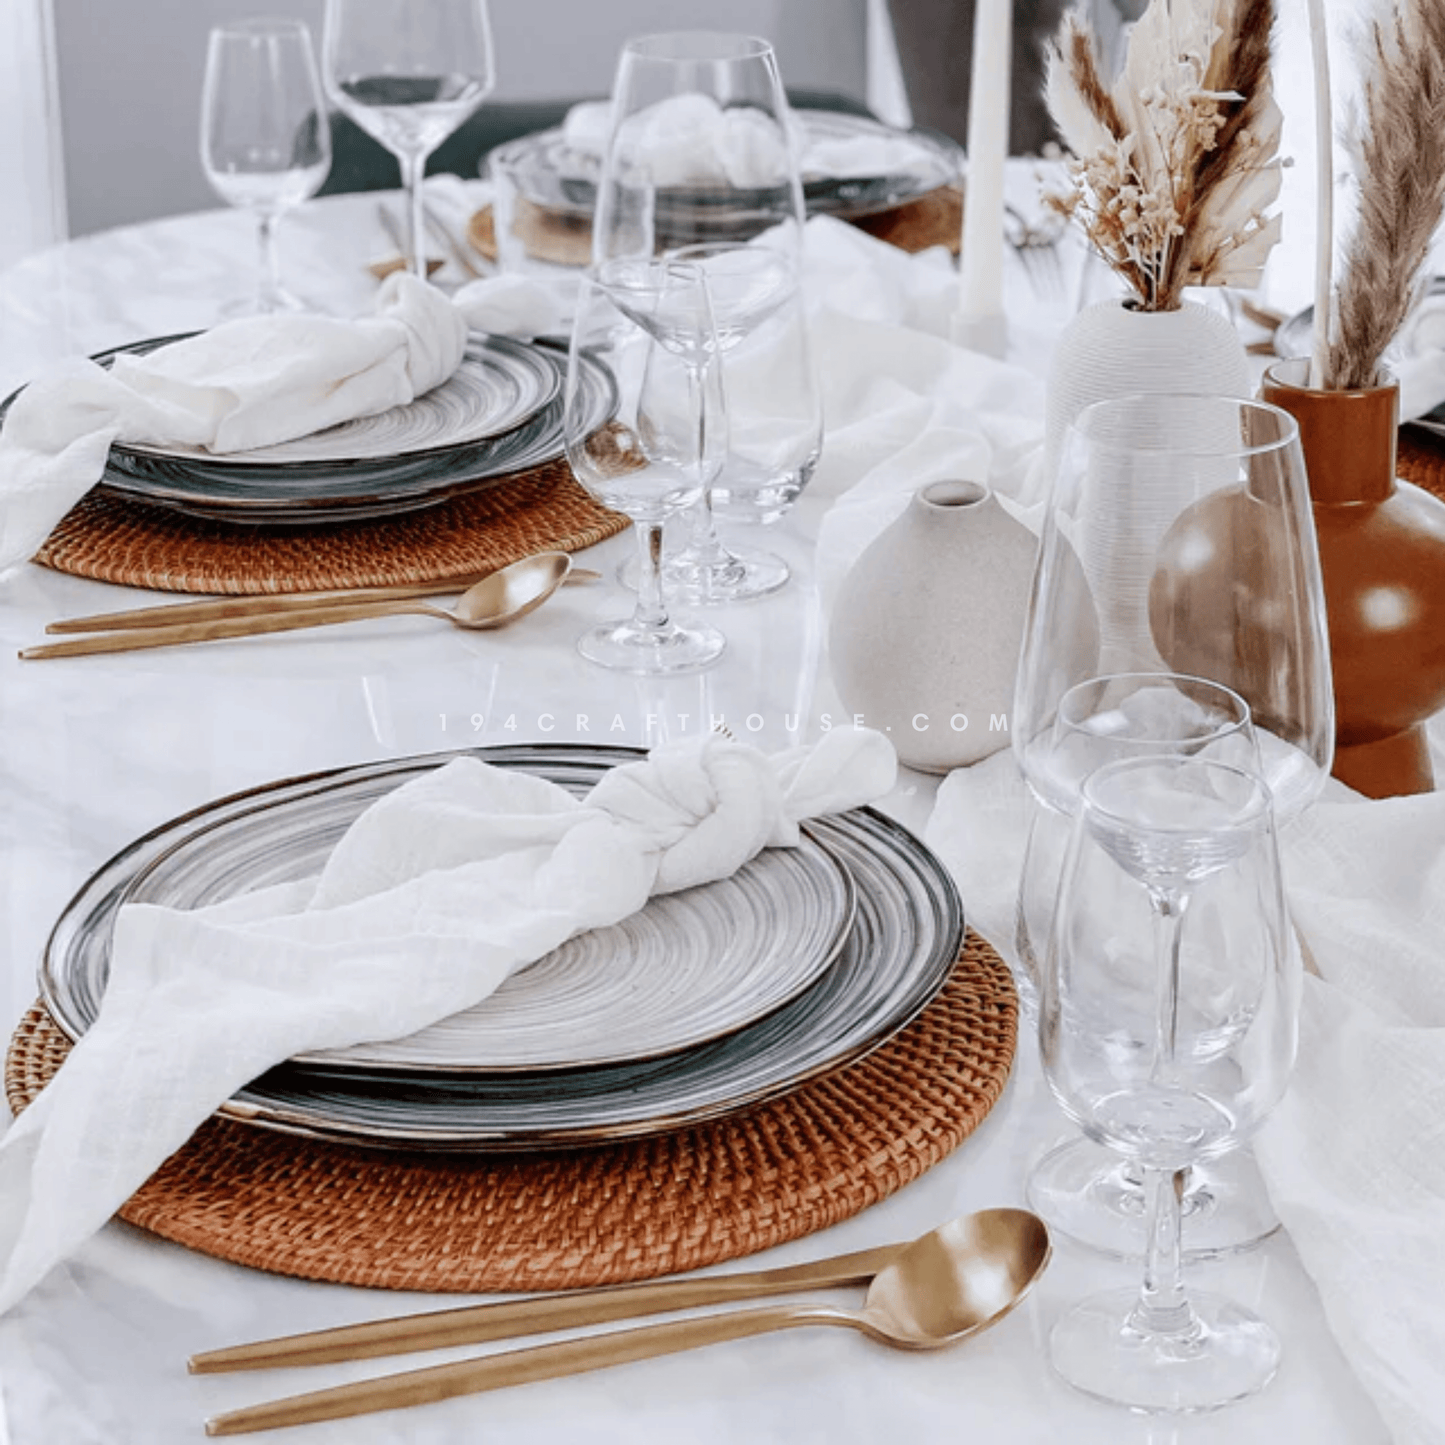 Hand-woven Round Placemats & Chargers Plate Thanksgiving Holiday Decor